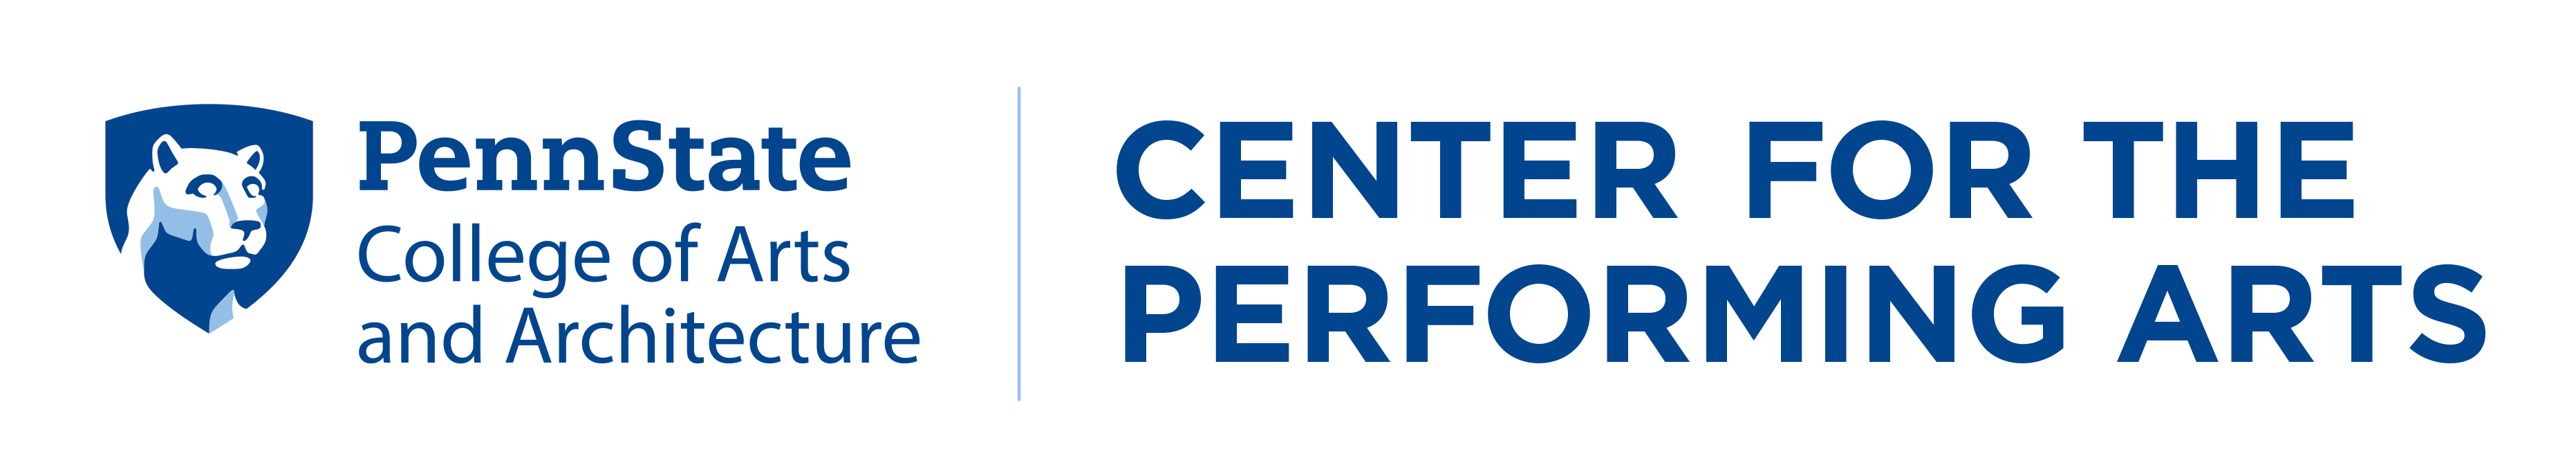 Penn State College of Arts and Architecture, and the Center for the Performing Arts at Penn State Logo